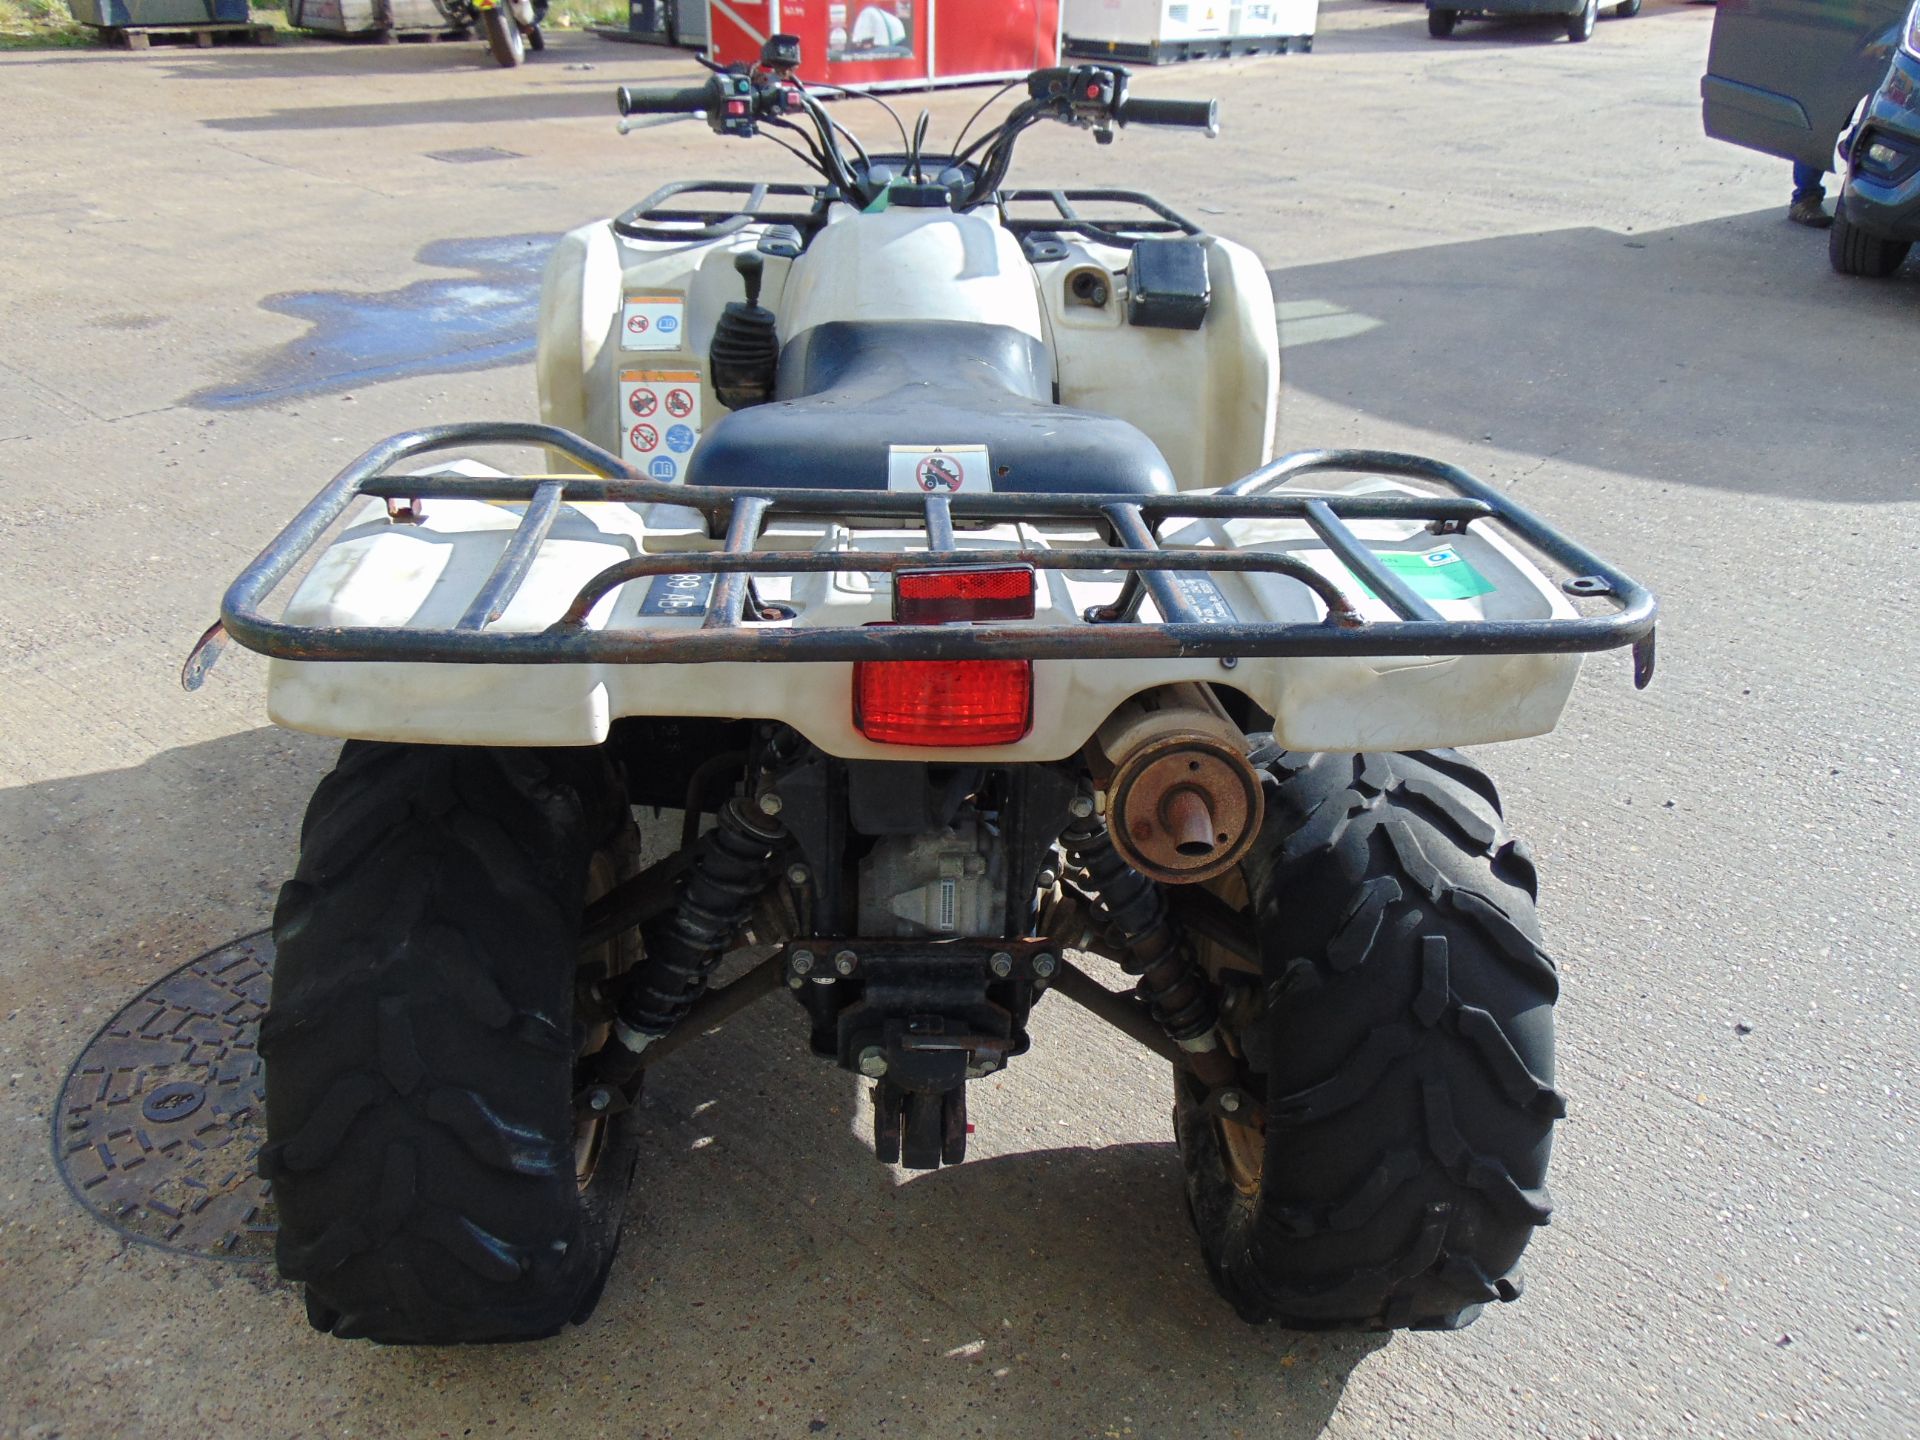 Military Specification Yamaha Grizzly 450 4 x 4 ATV Quad Bike - Image 7 of 16